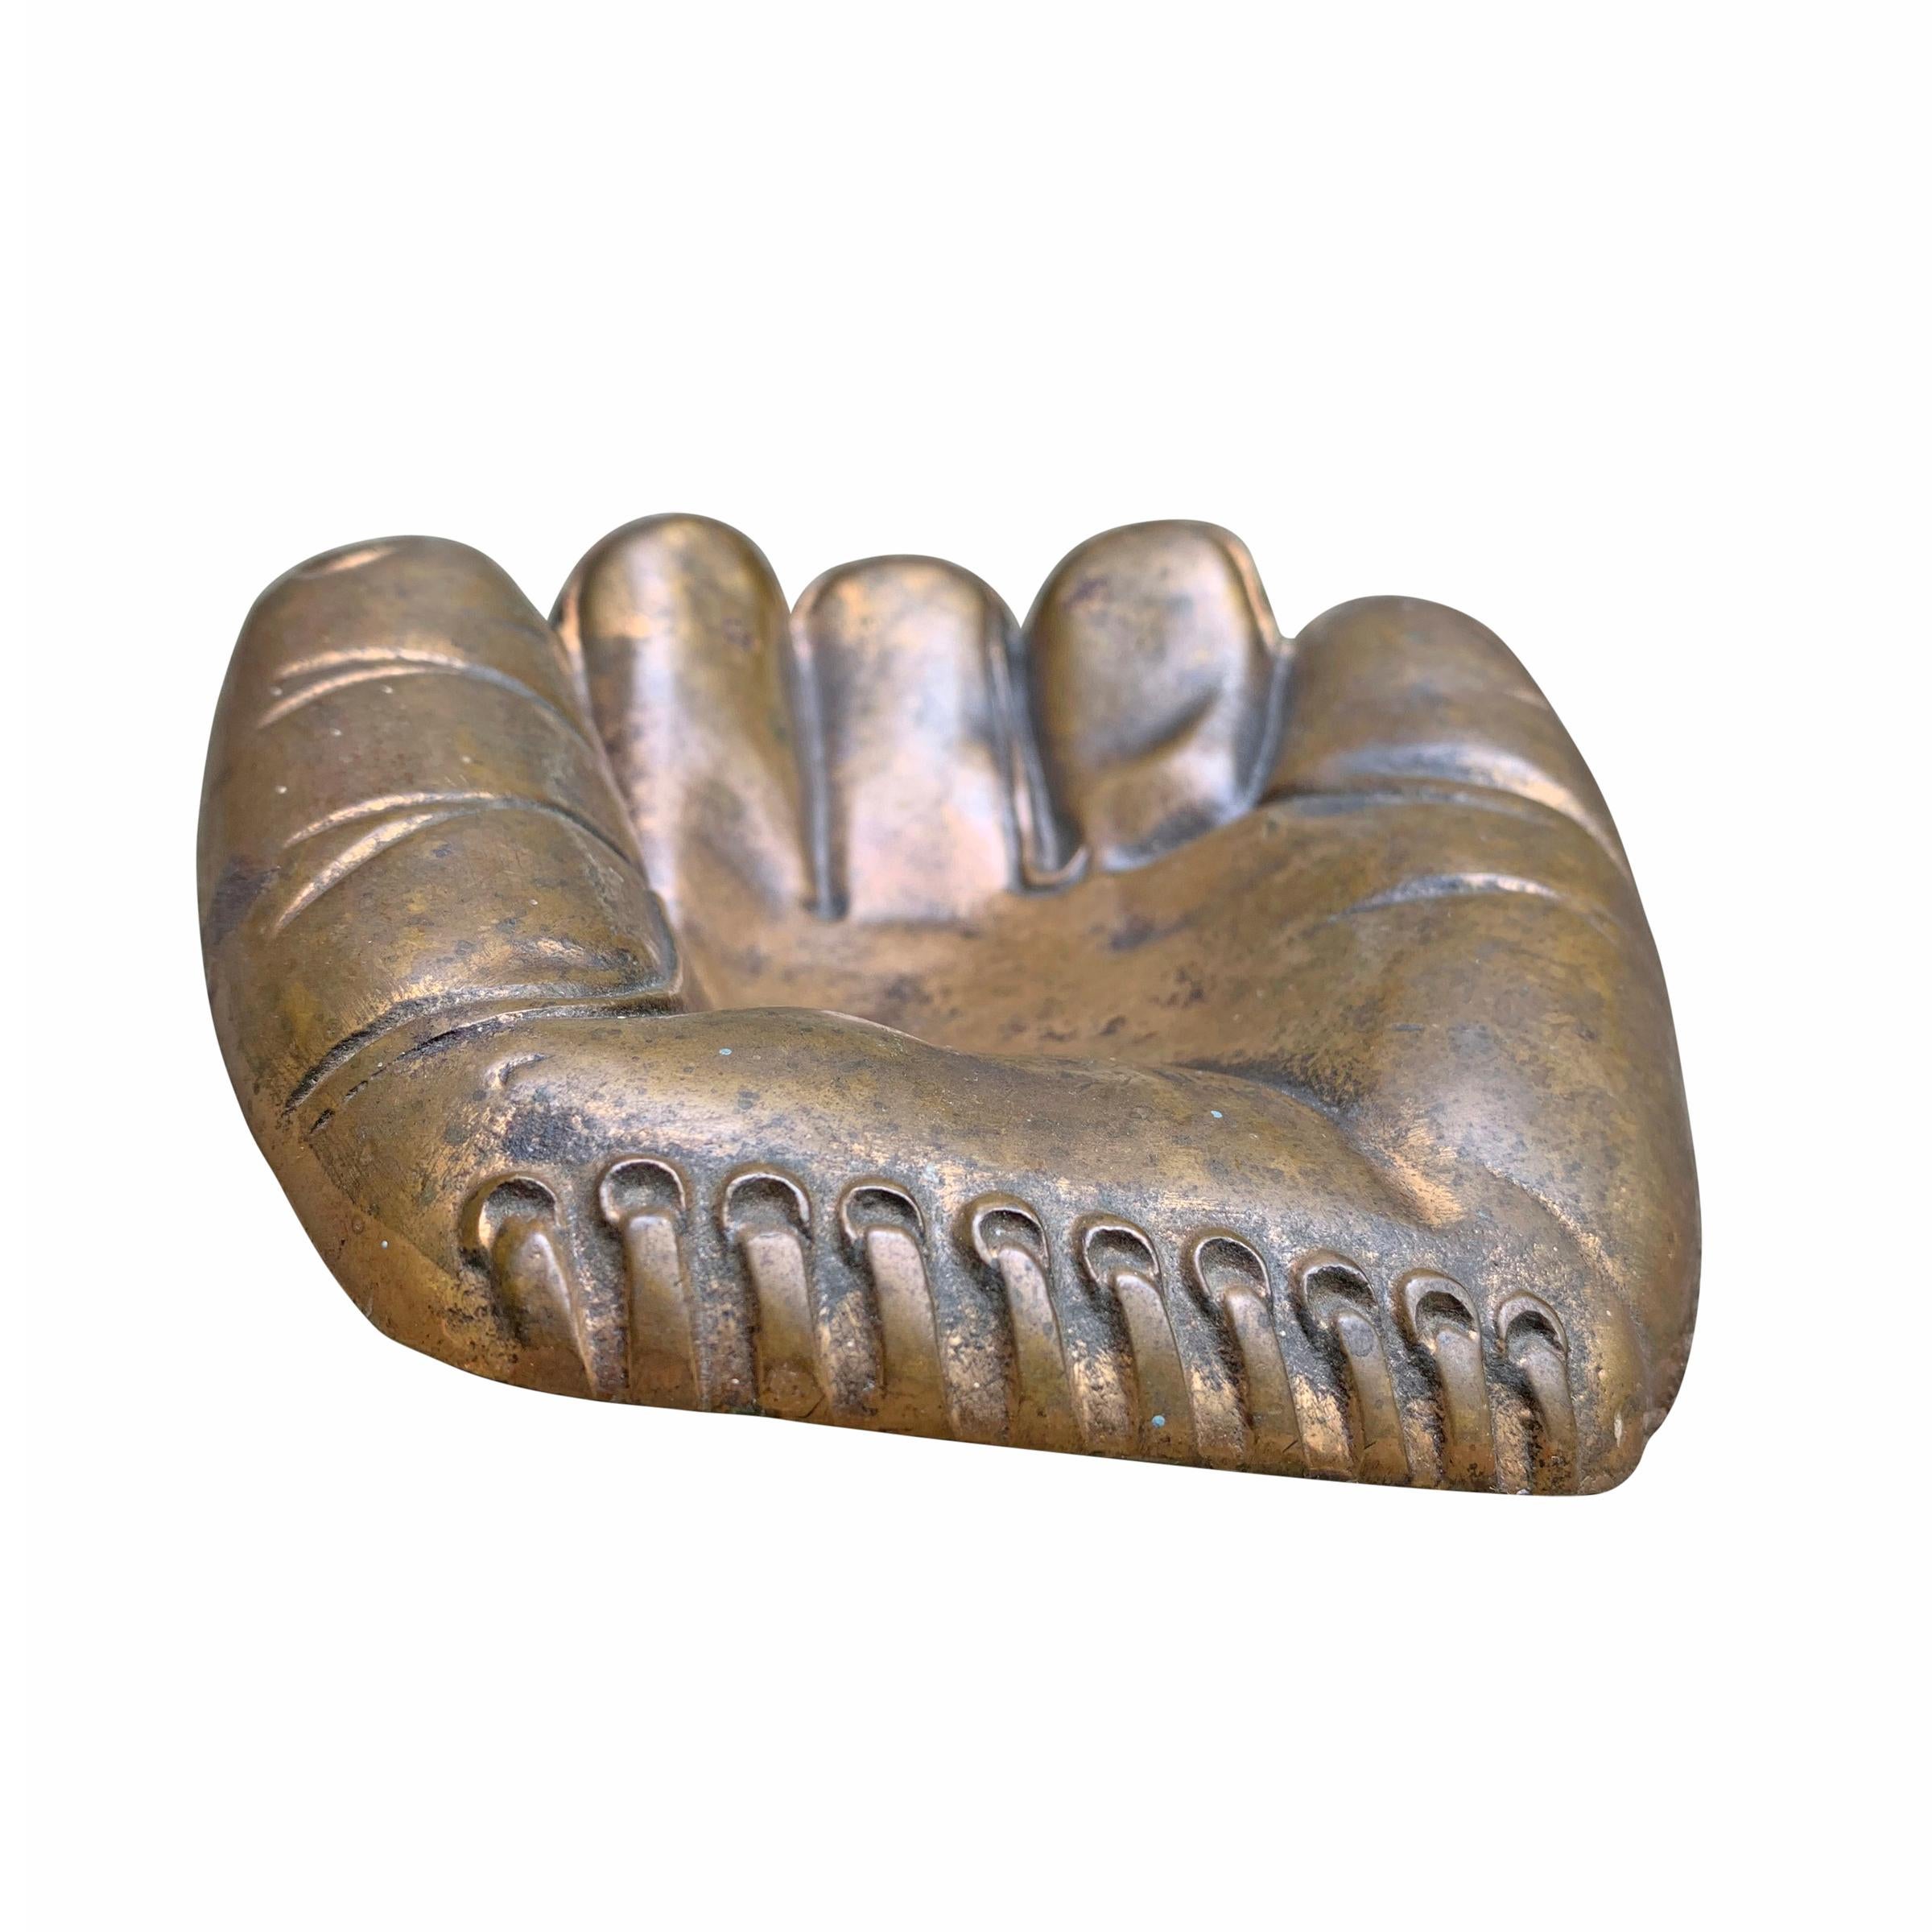 A whimsical mid-20th century American cast bronze baseball glove bowl to catch all of your change, keys, or your particular vice.